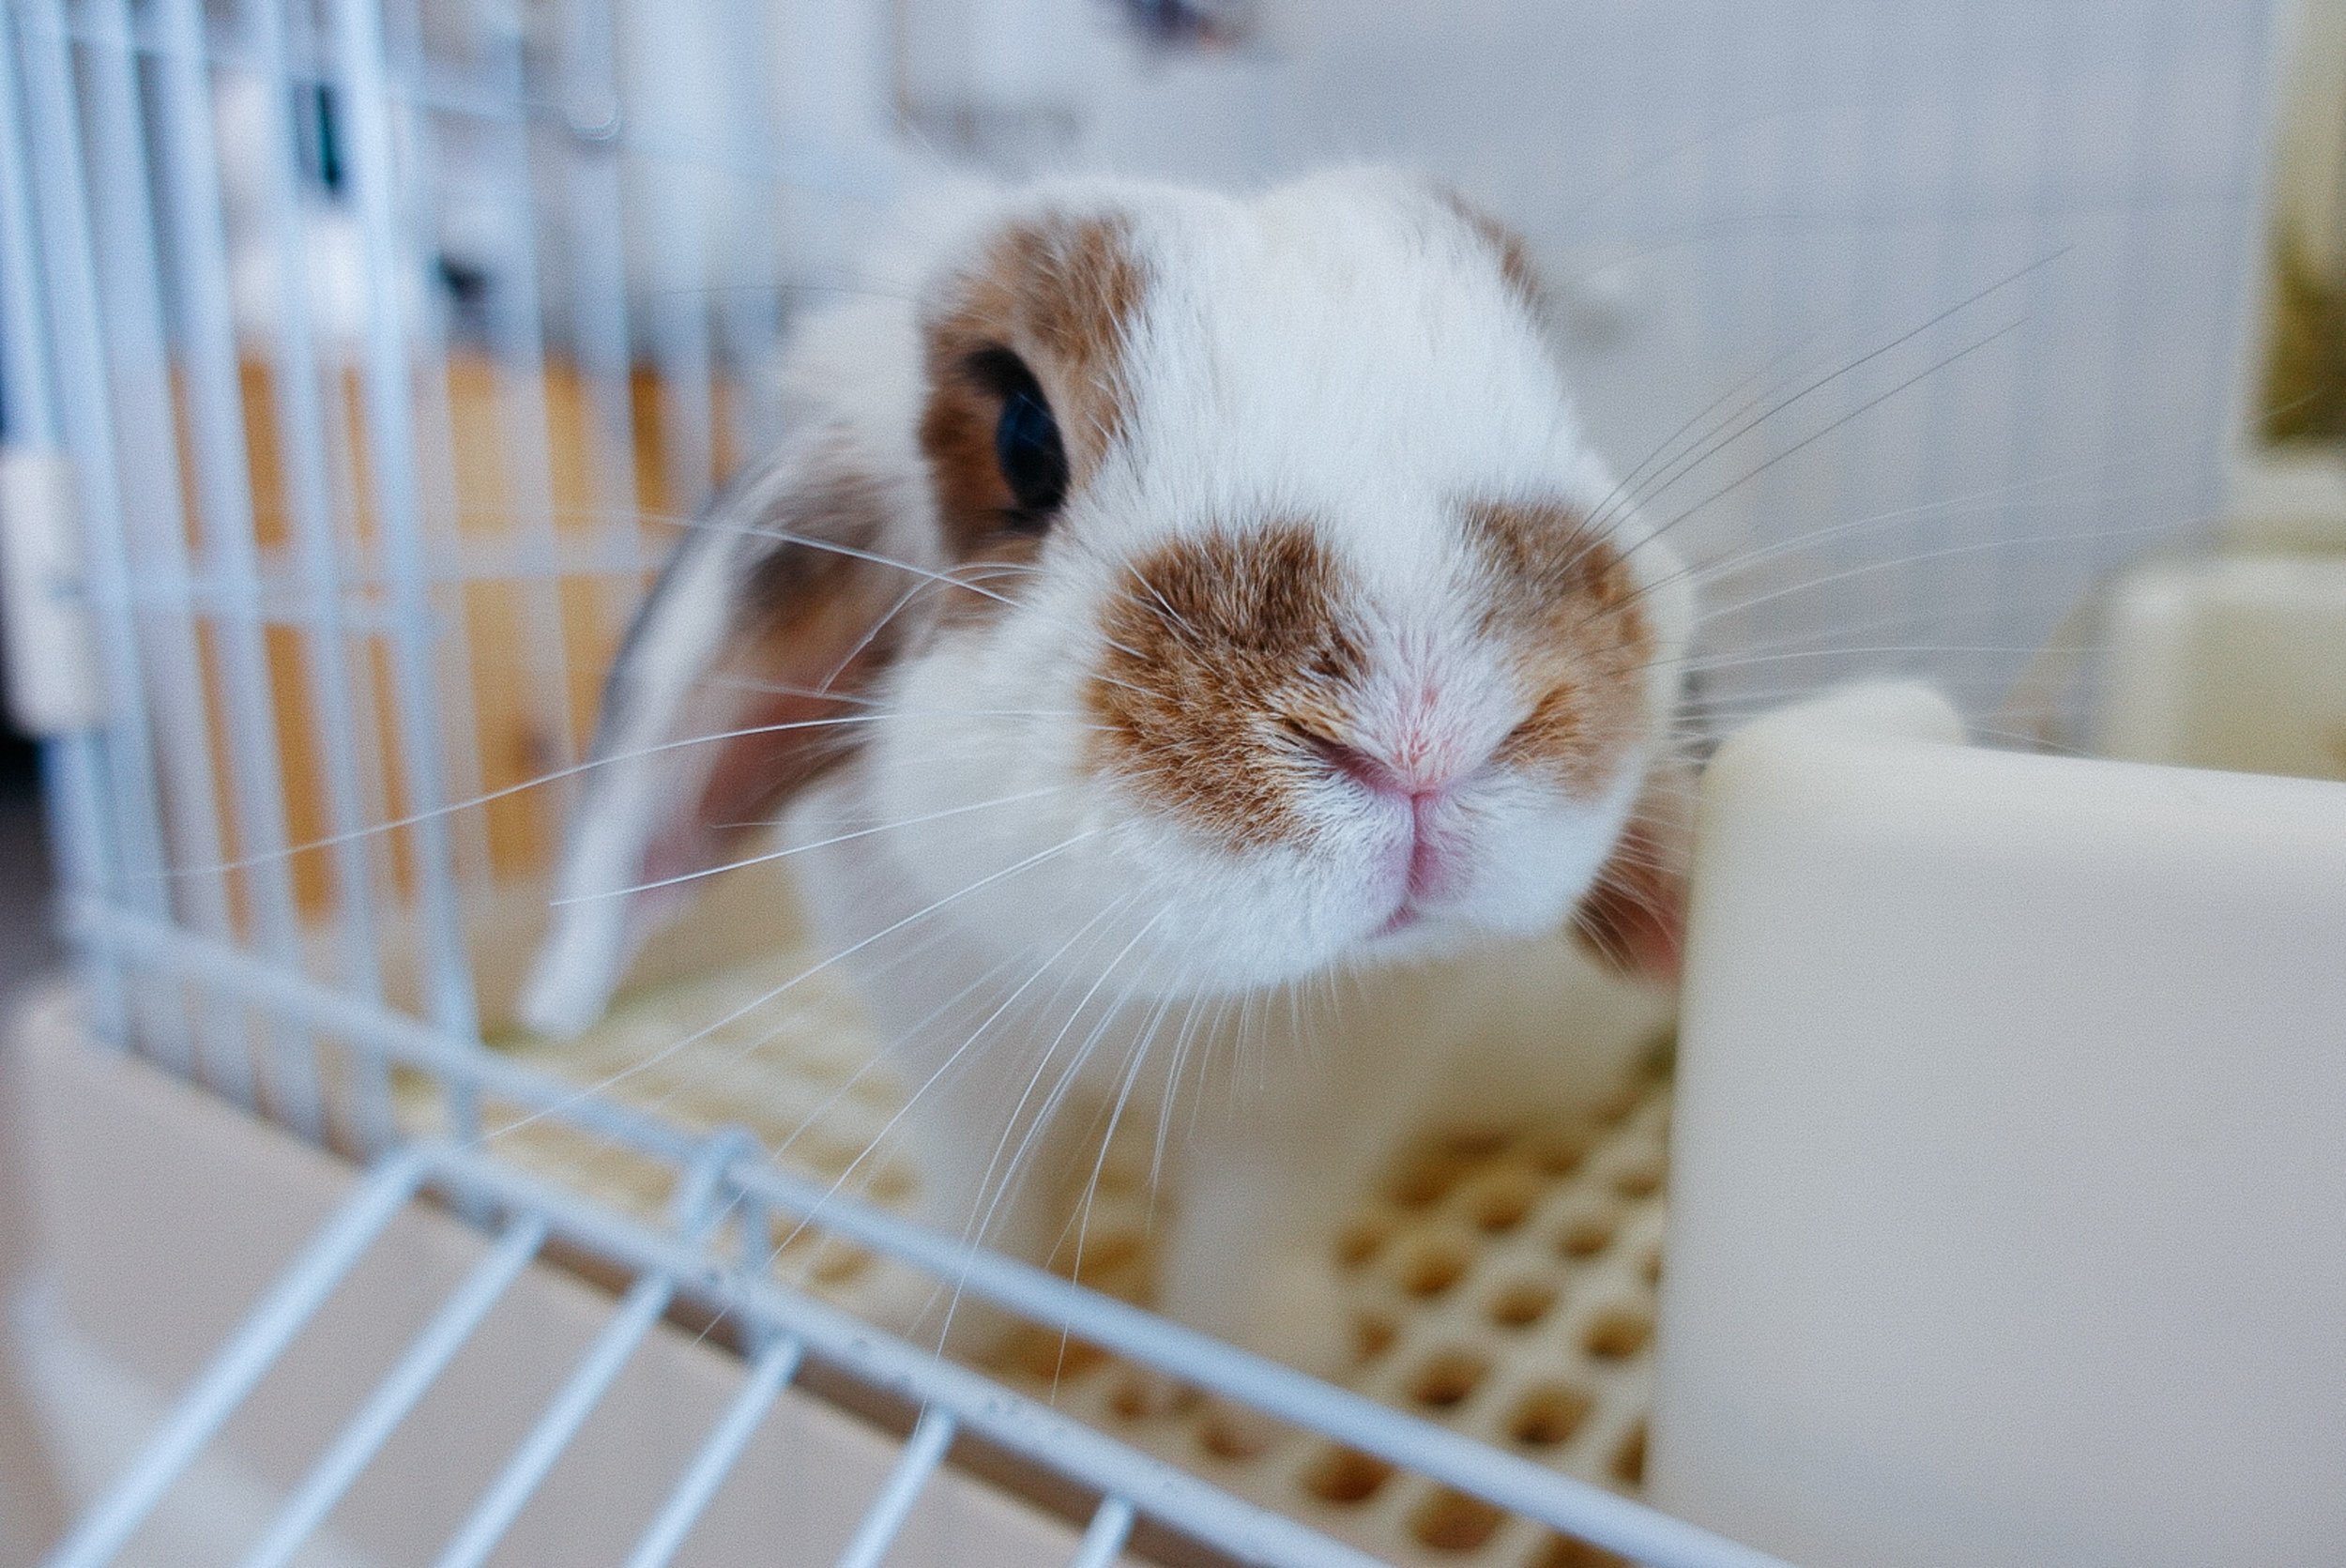 Will Europe Listen to the  Million People Who've Called for an End to  Cosmetic Animal Testing? — Species Unite